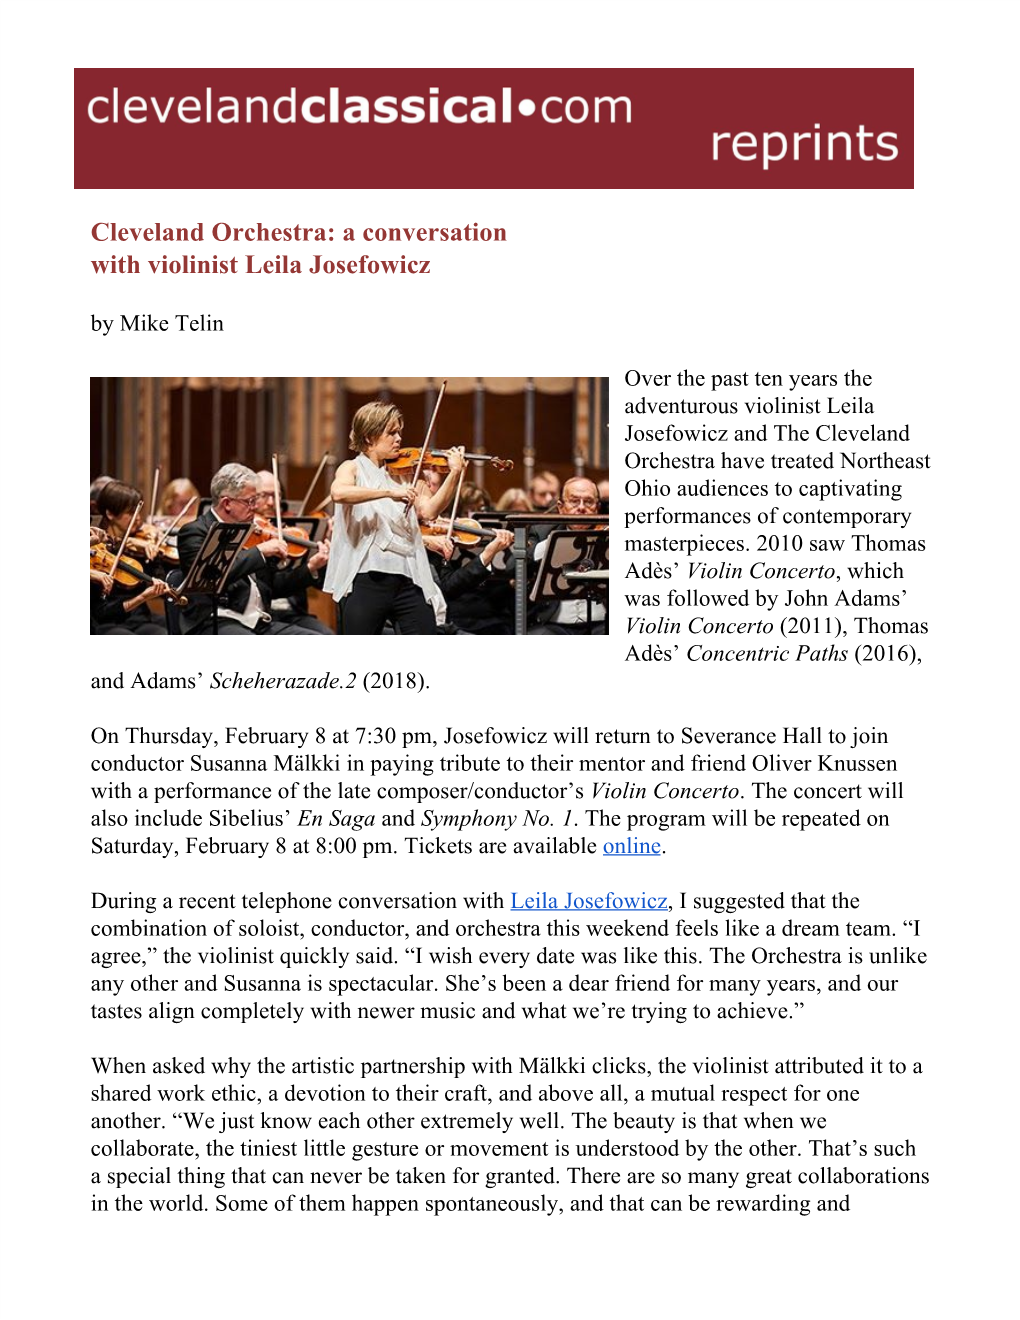 Cleveland Orchestra: a Conversation with Violinist Leila Josefowicz by Mike Telin